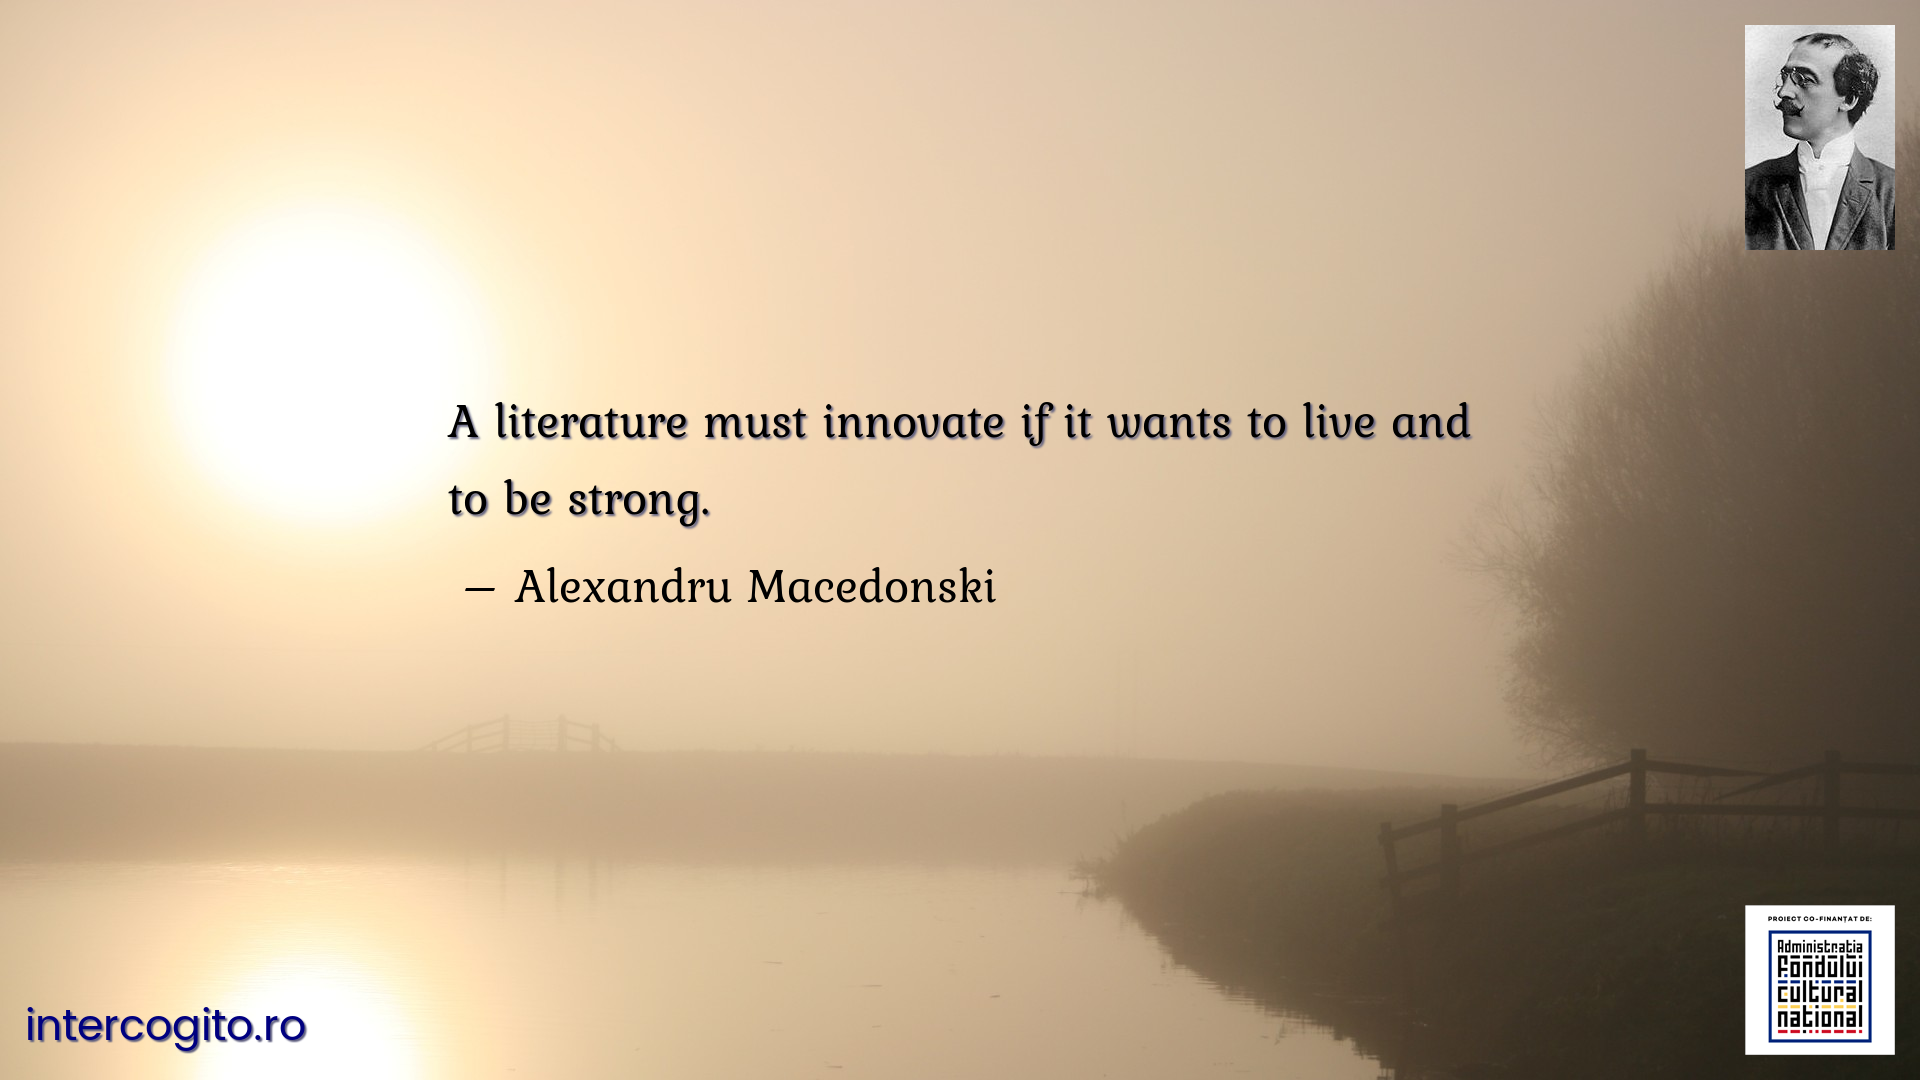 A literature must innovate if it wants to live and to be strong.